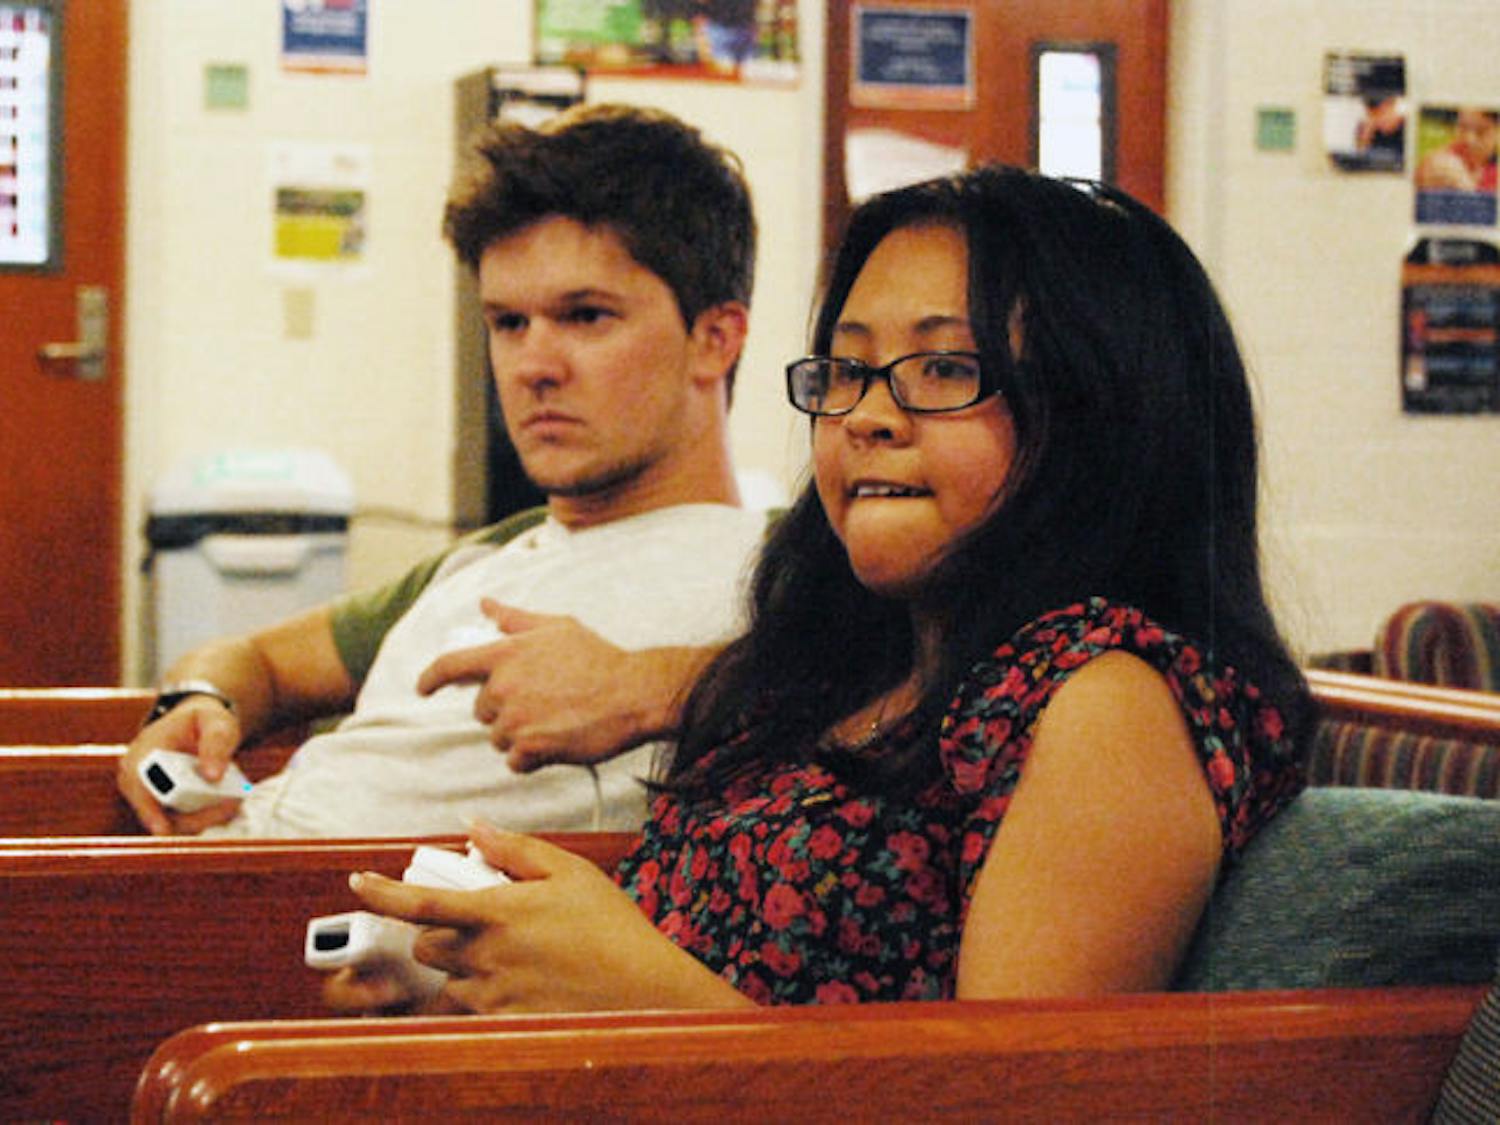 UF biology junior Julie Tran, 20, concentrates on defeating political science senior Dustin Morris, 21, in a game of Super Smash Bros. Brawl in the Lakeside Complex commons Wednesday evening.